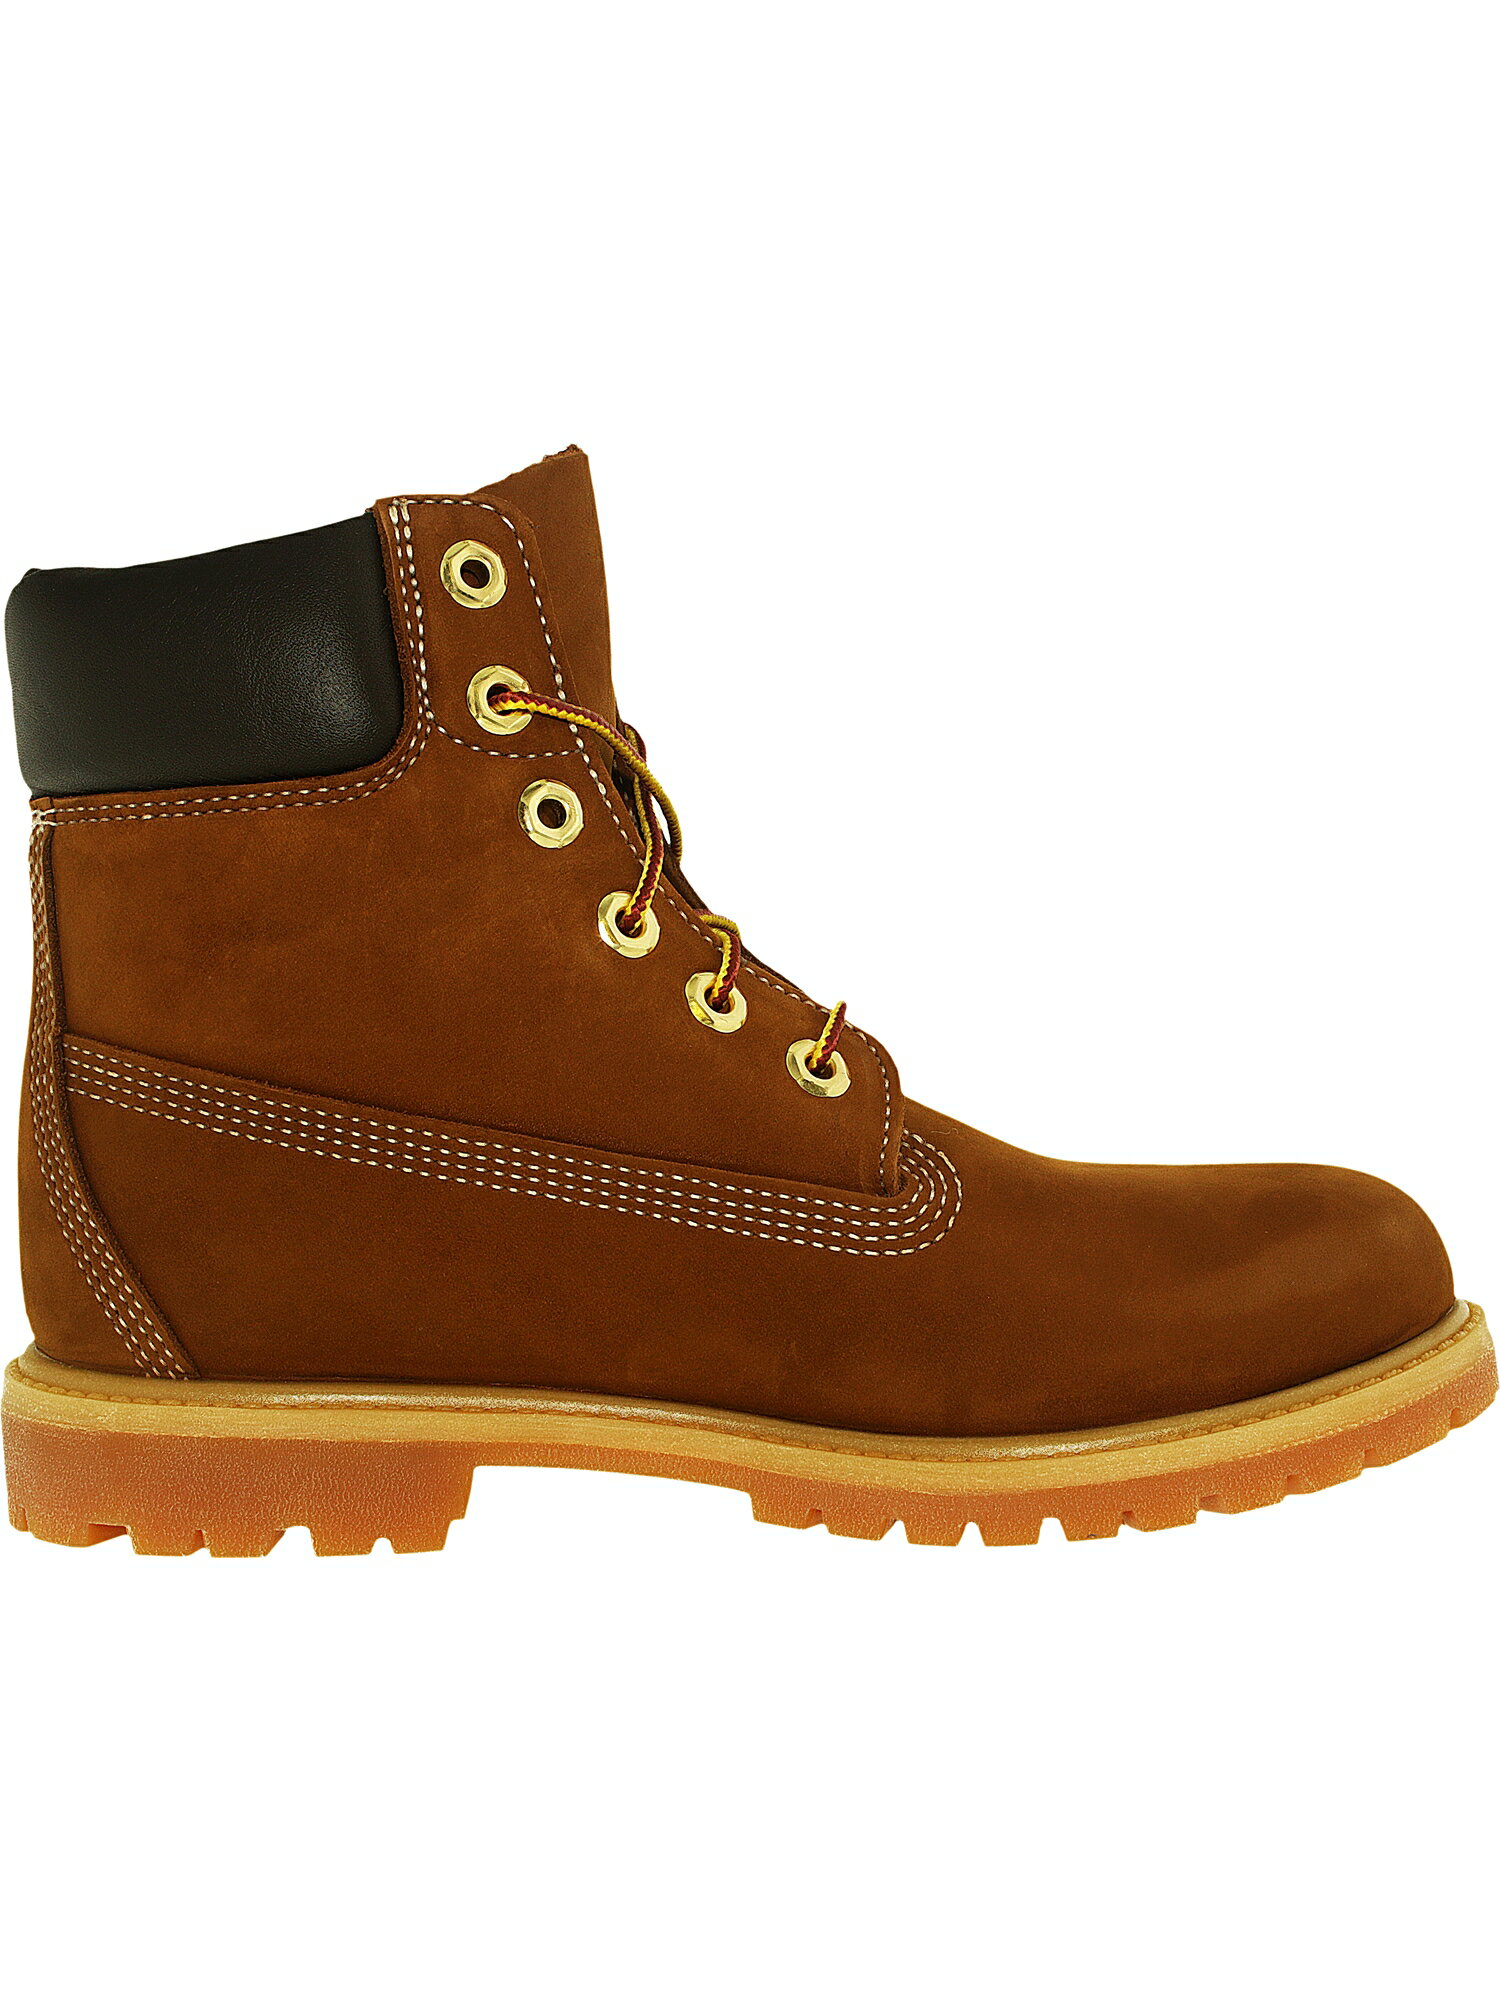 AreaTrend: Timberland Women's 6 Inch Premium Boot Leather Rust Brown ...